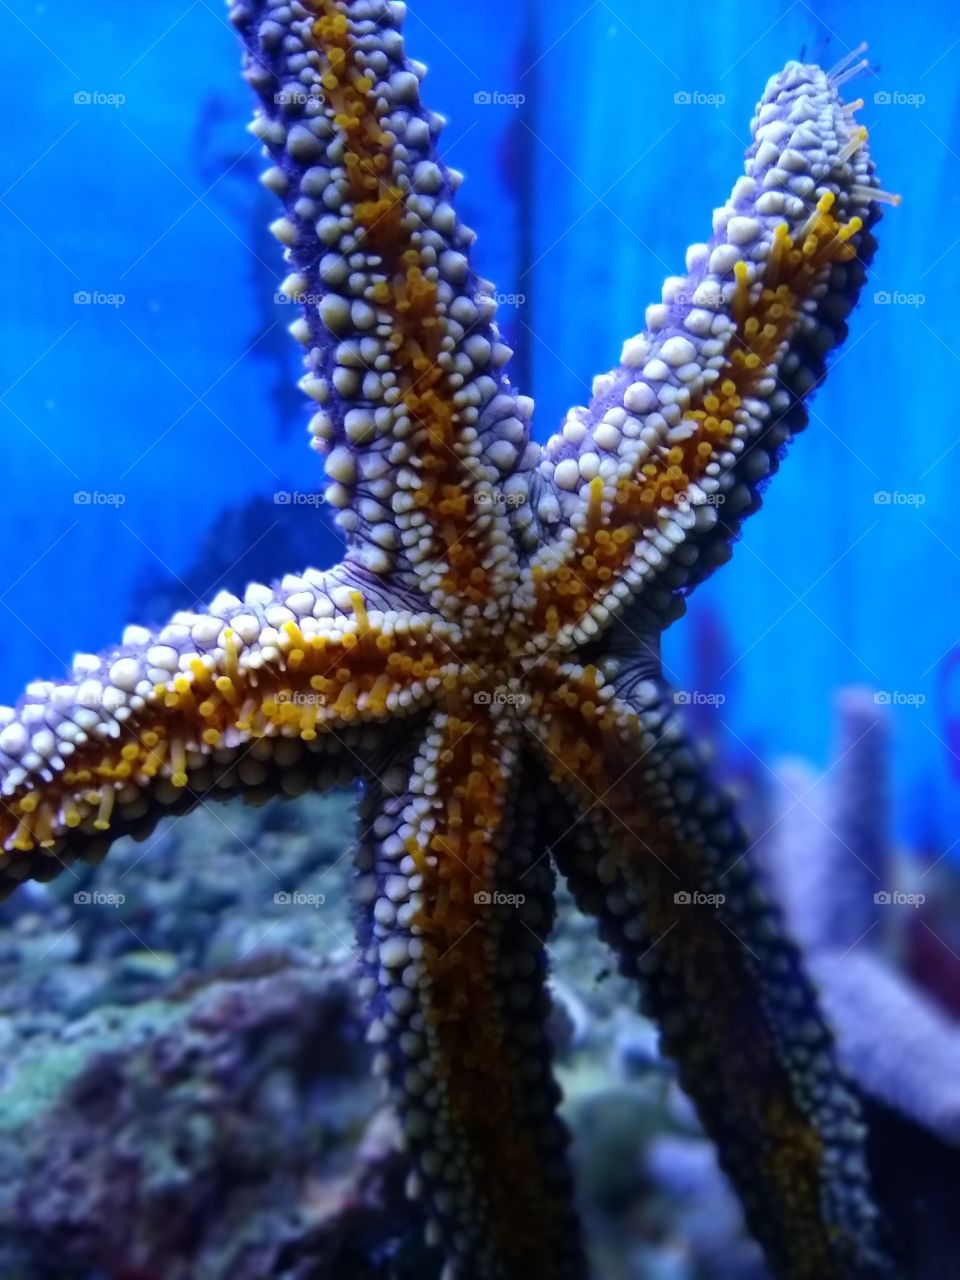 A starfish against the side of a glass tank, showing the feet on the underside.